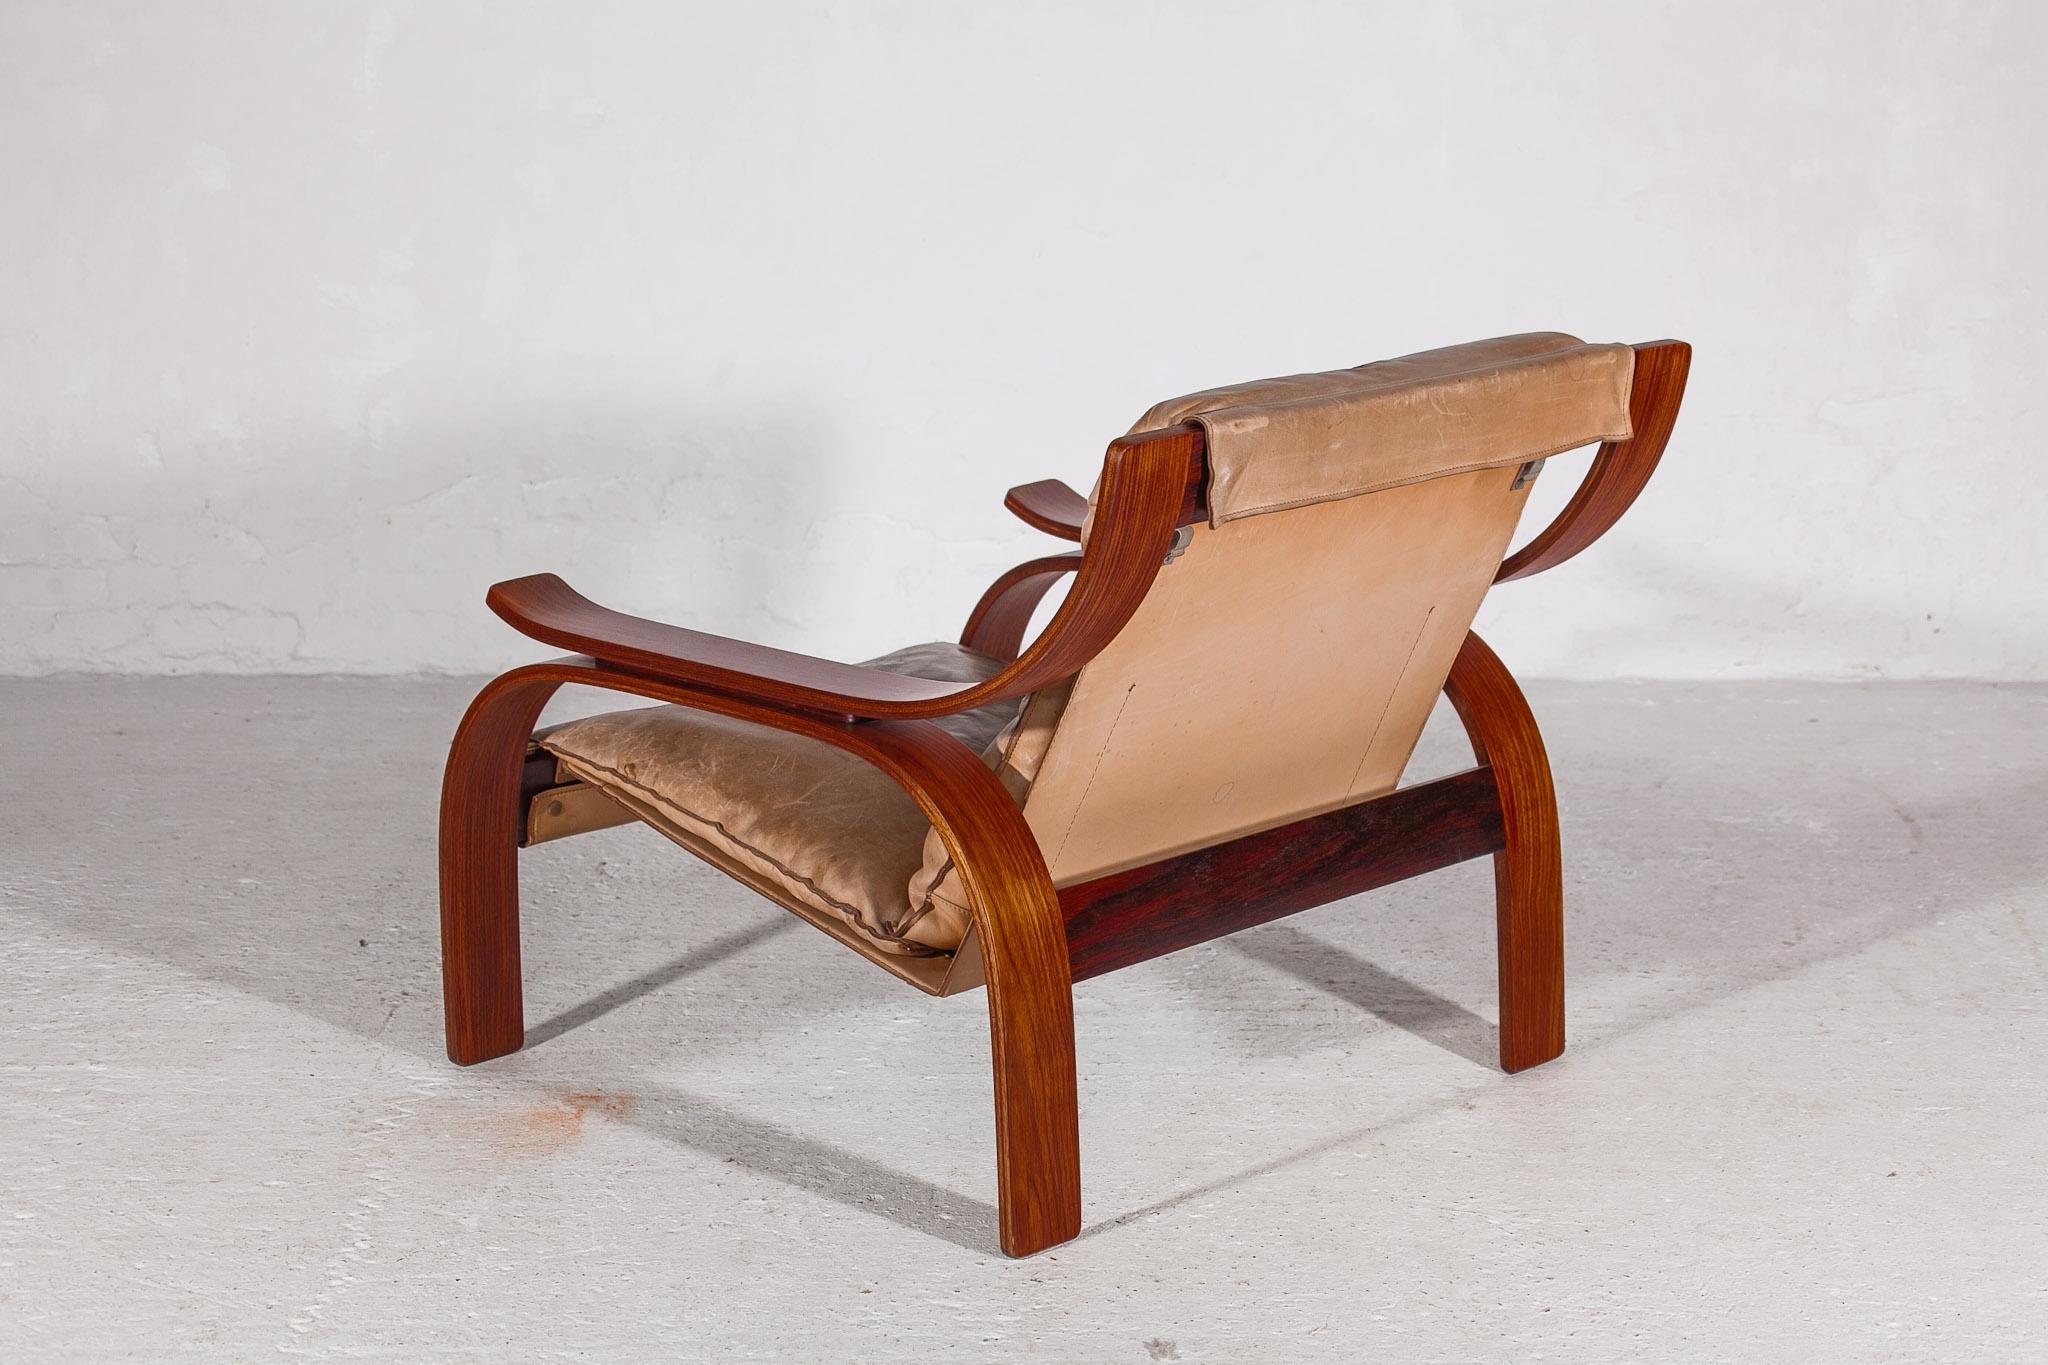 Hand-Crafted Set of Two Lounge Chairs designed by Marco Zanuso, 1962 Italy, Model 